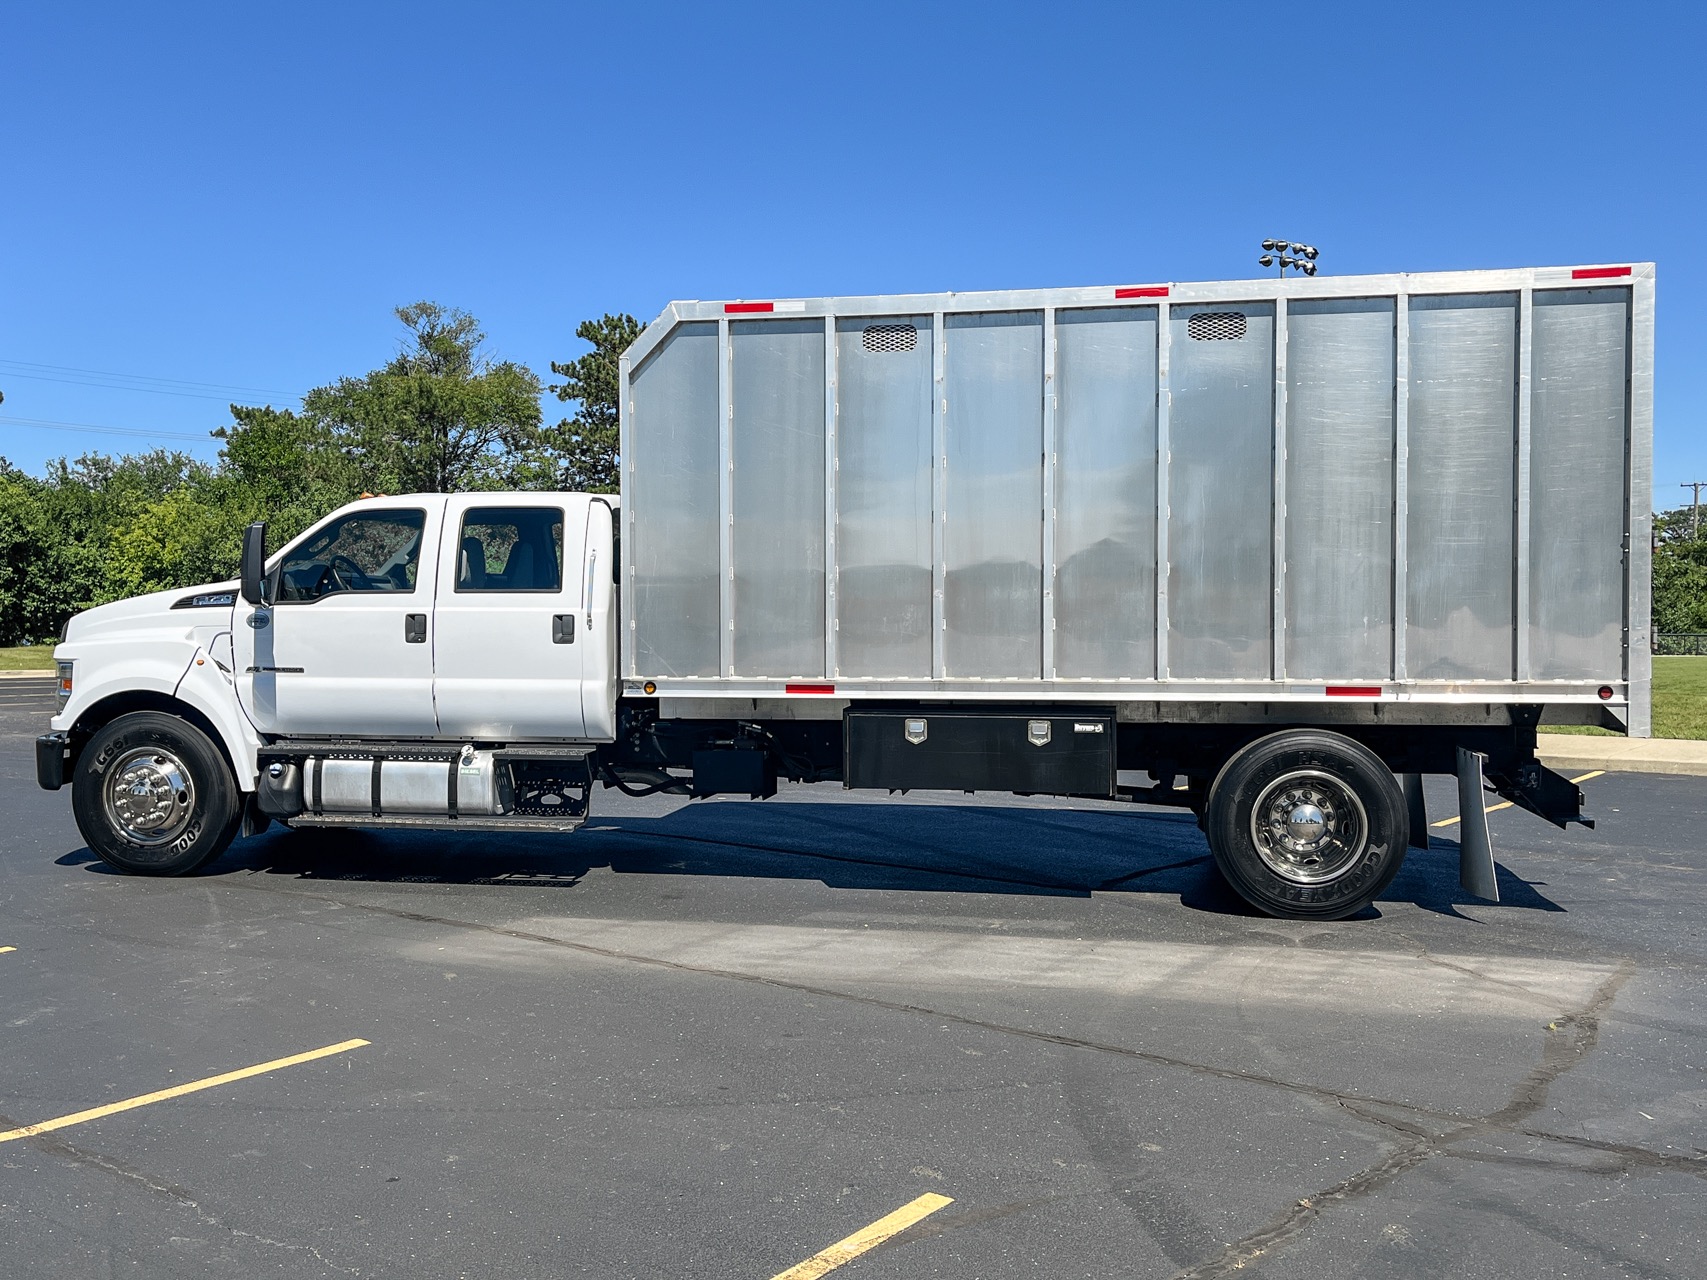 Used-2017-Ford-F-750-Super-Duty-Crew-Cab-Chipper-Truck---PowerStroke-Diesel---Automatic---LOW-MILES